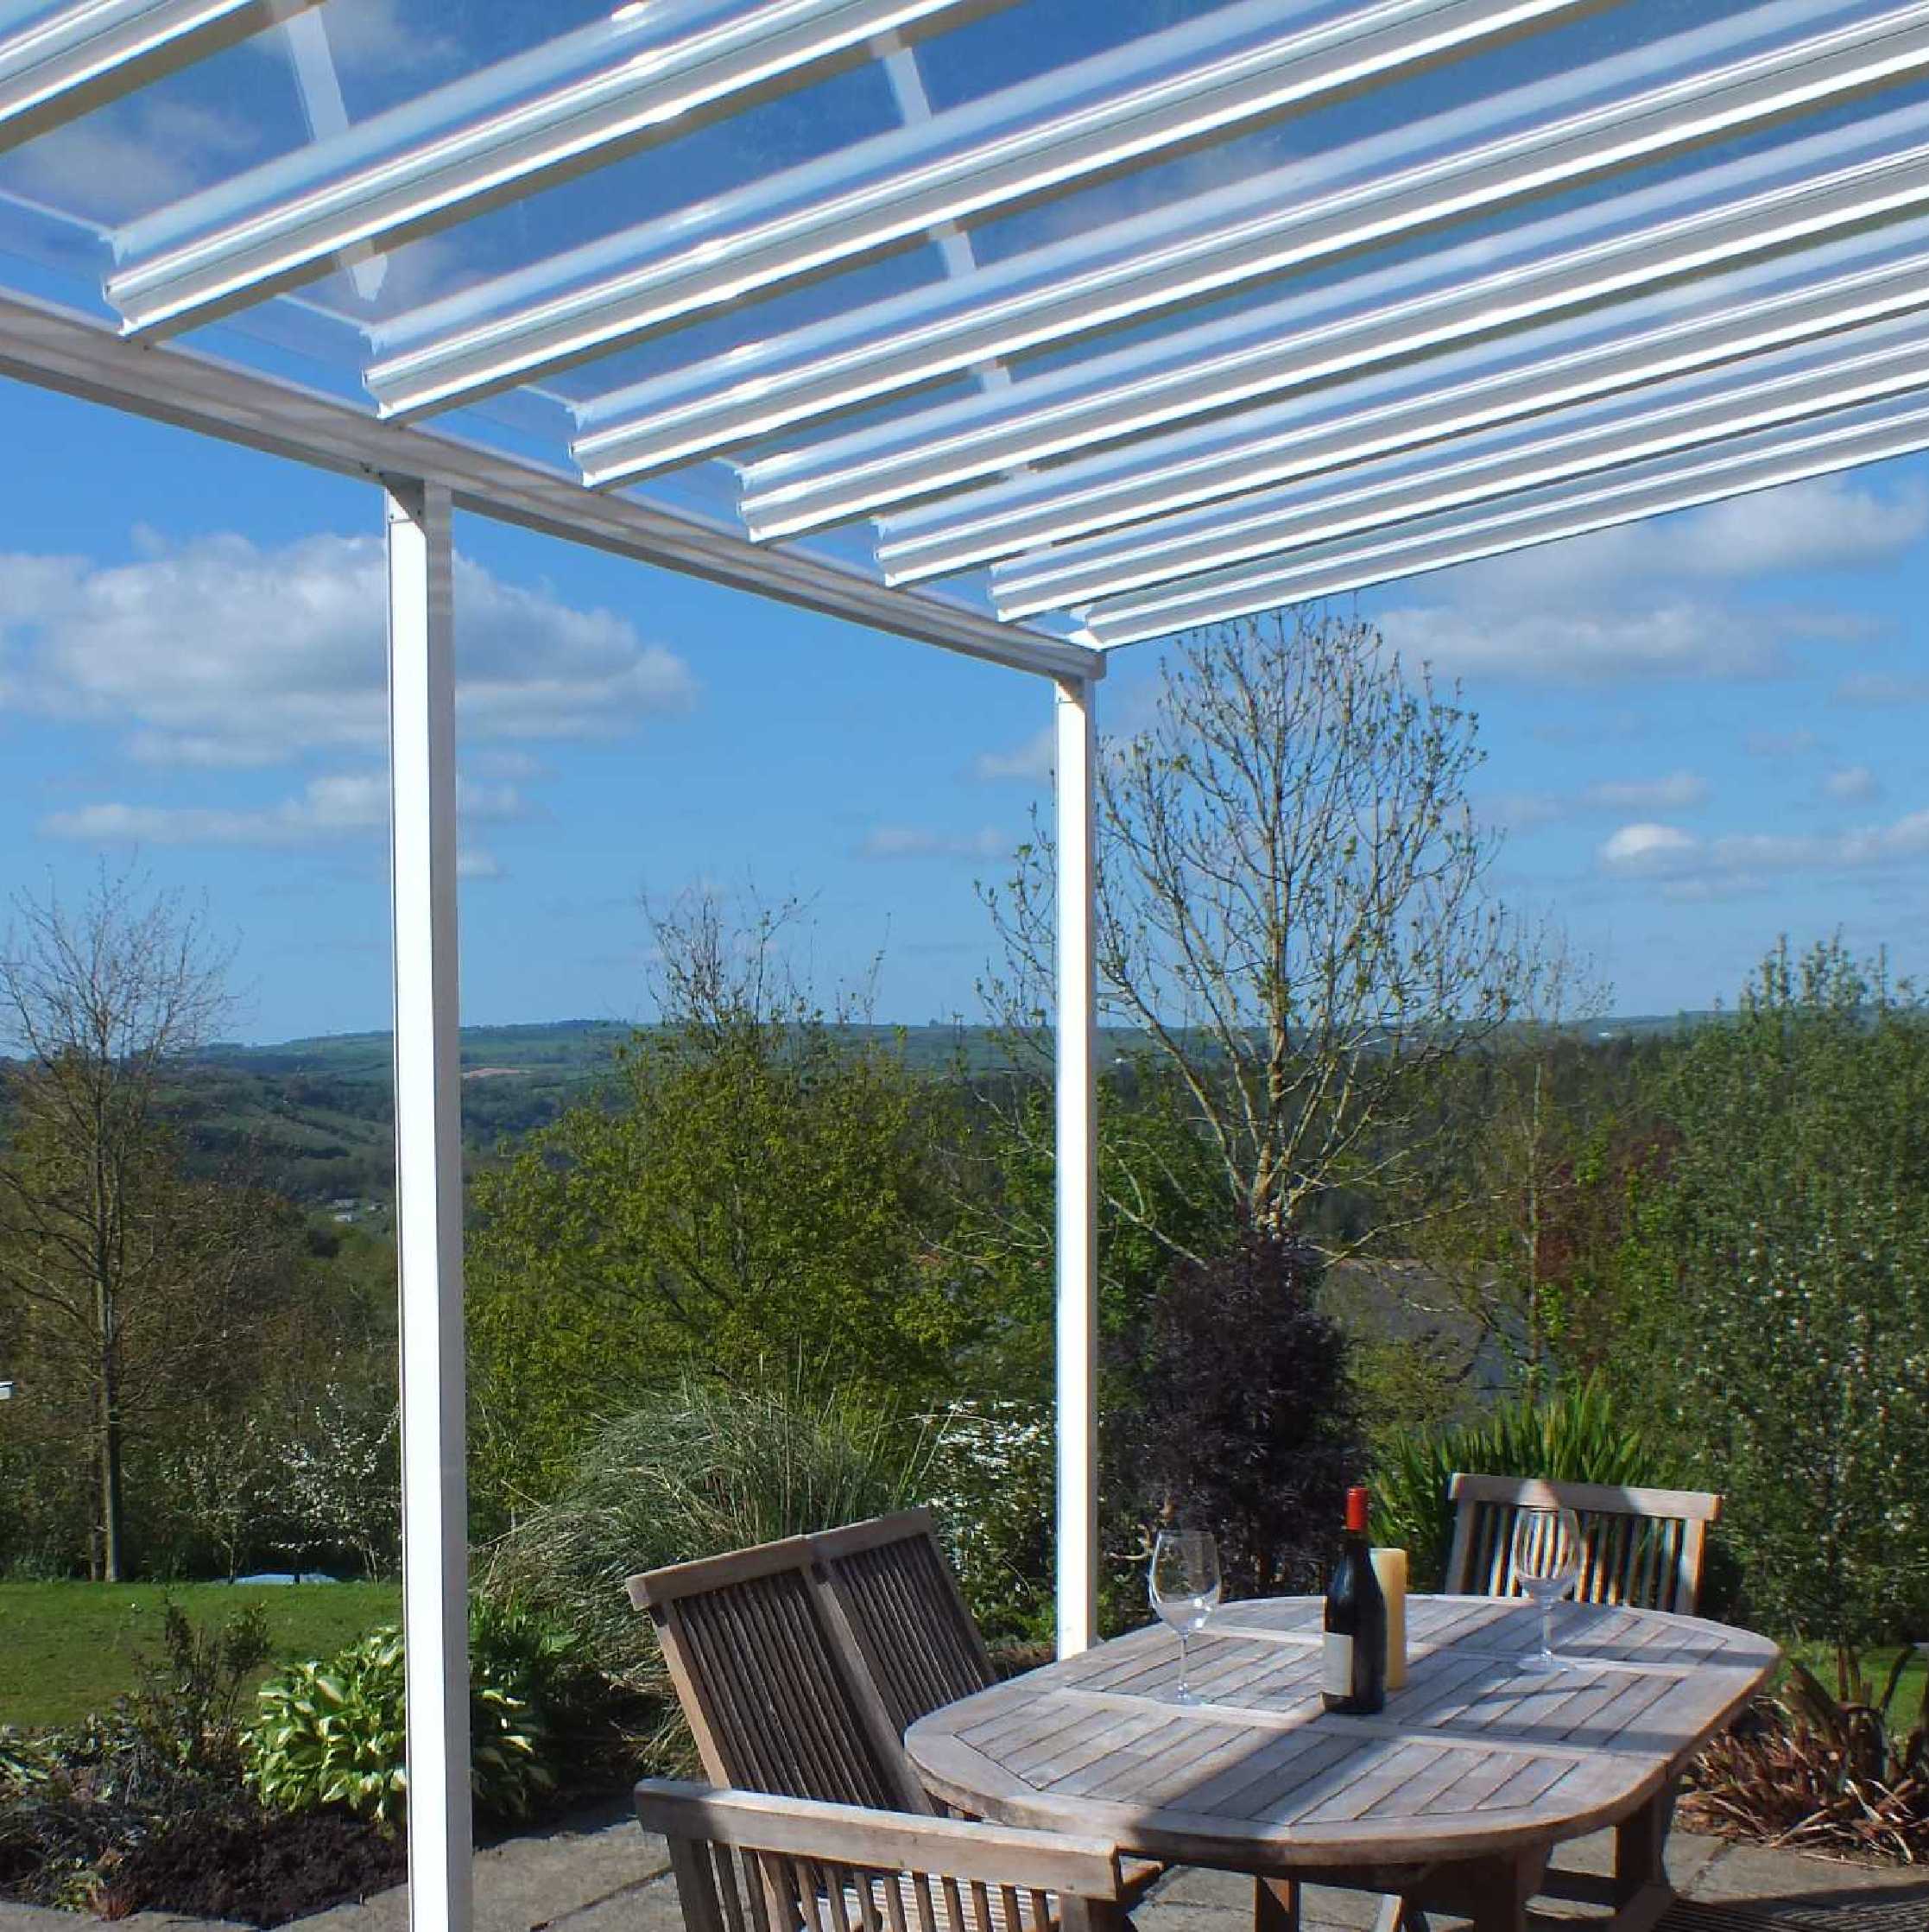 Buy Omega Smart Lean-To Canopy, White with 6mm Glass Clear Plate Polycarbonate Glazing - 7.7m (W) x 3.5m (P), (4) Supporting Posts online today